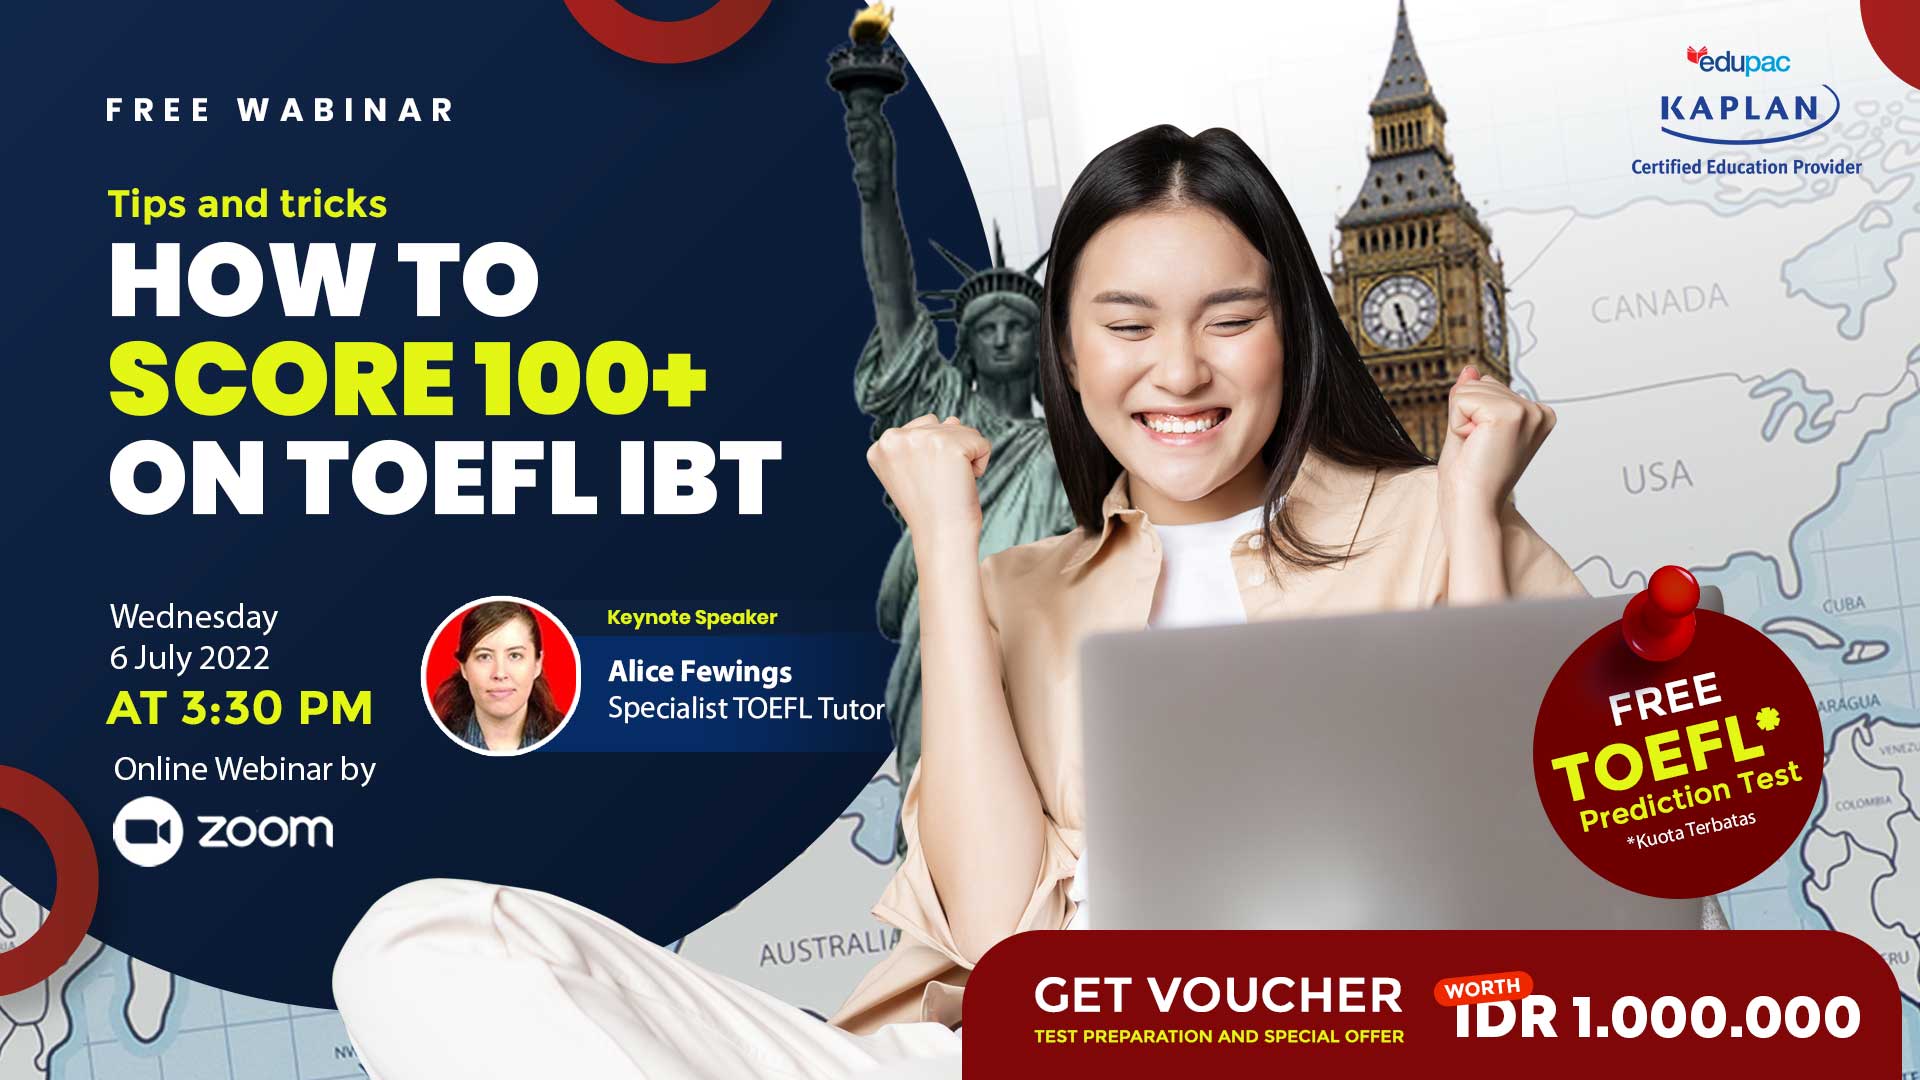 Free Virtual Workshop "Tips and tricks How to Score 100+ on TOEFL iBT" 